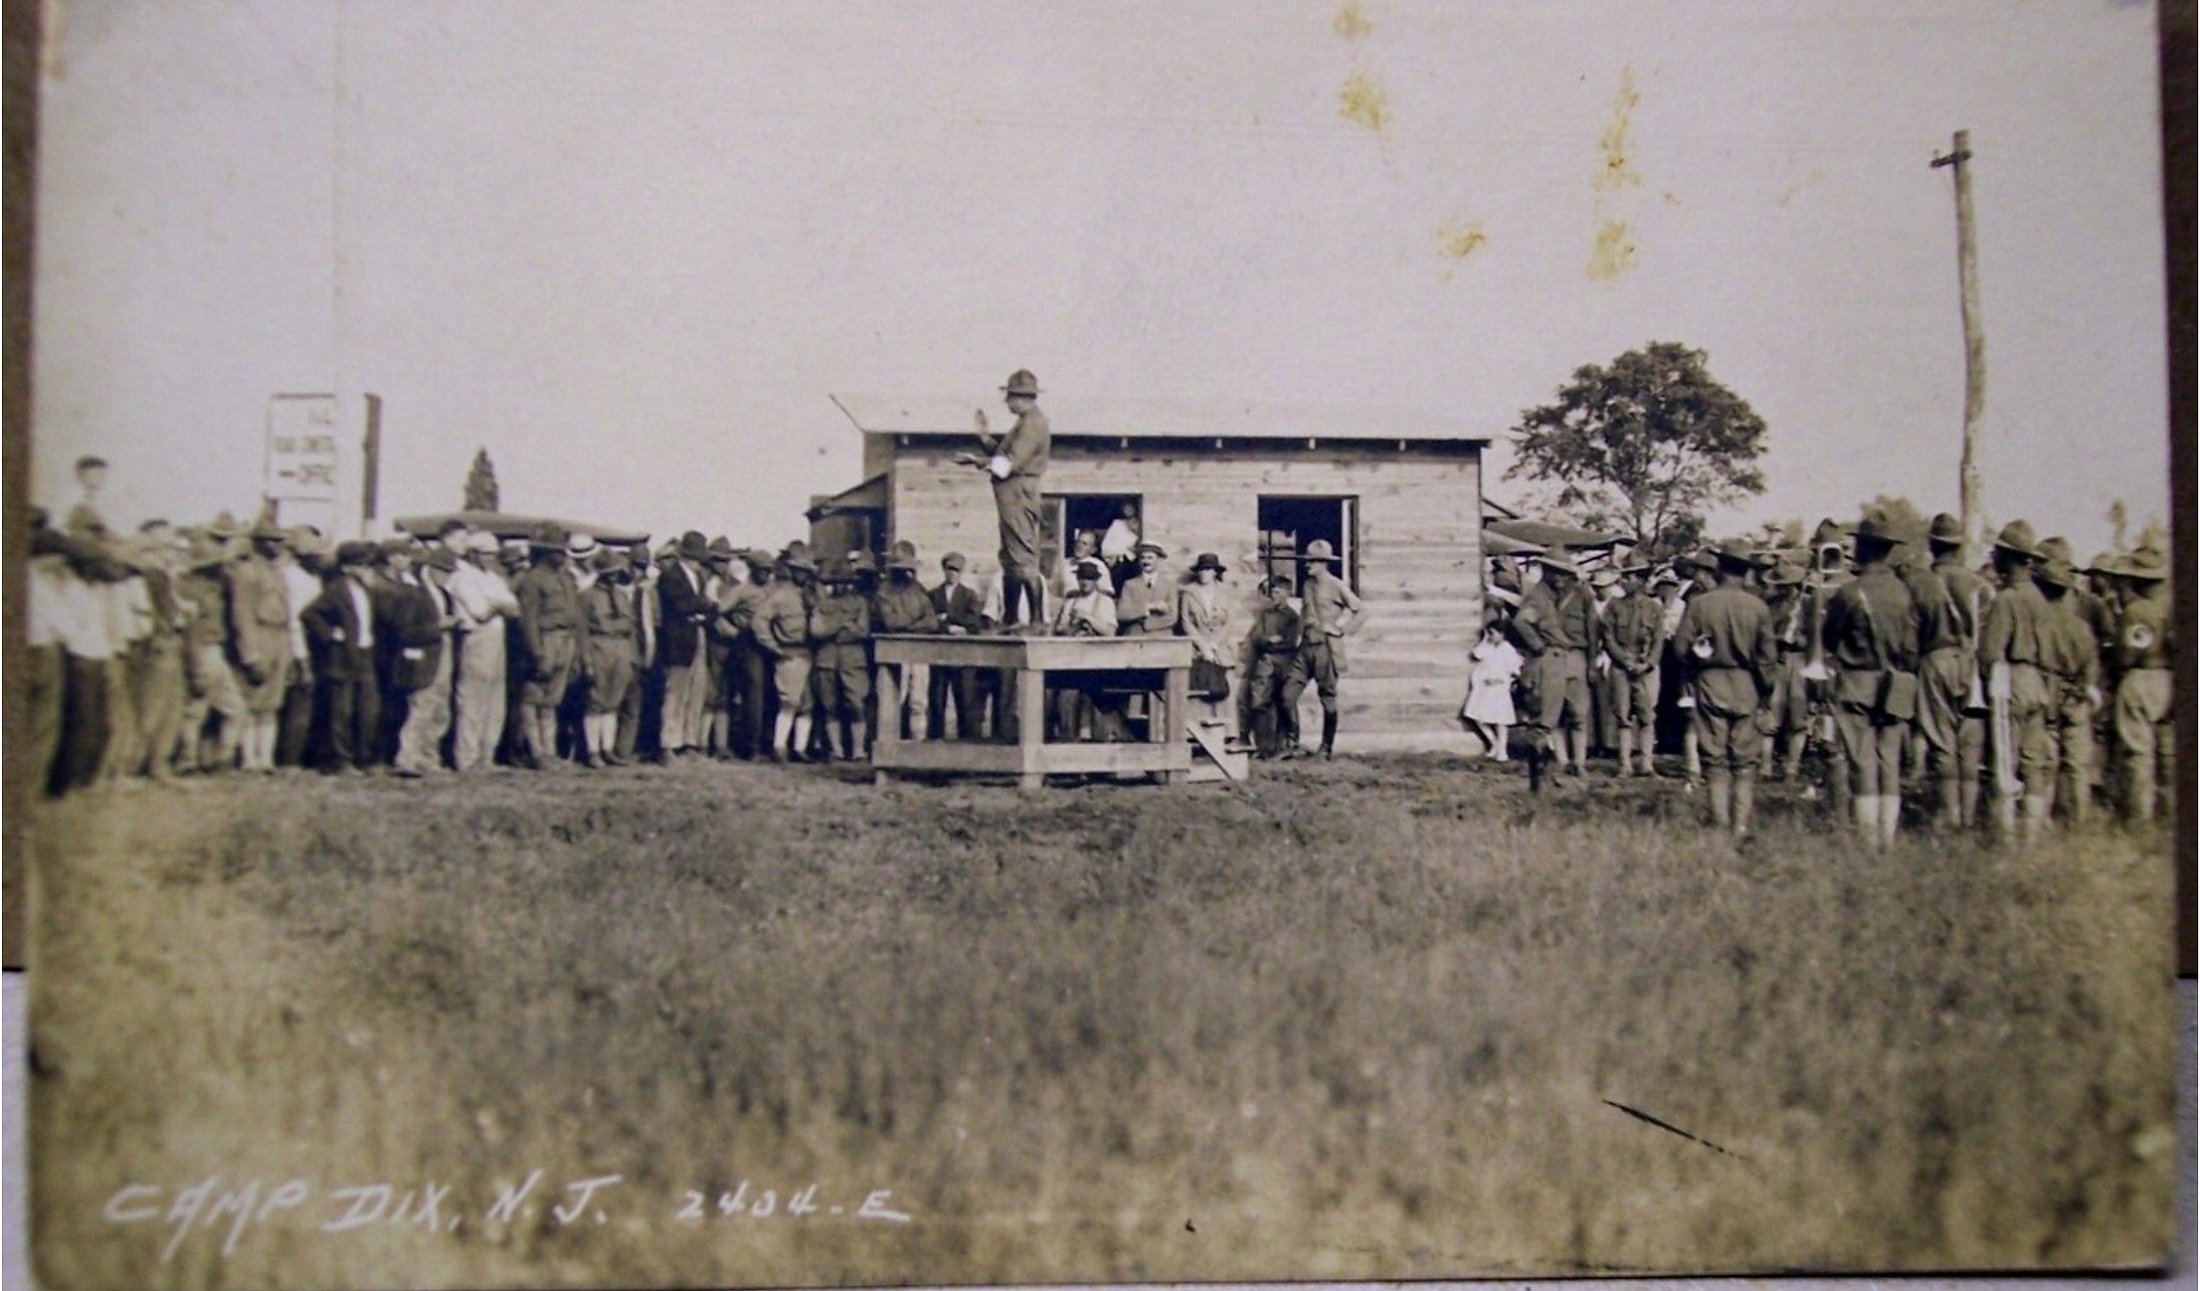 Camp Dix - Something is going on but I dont know what - c 1918